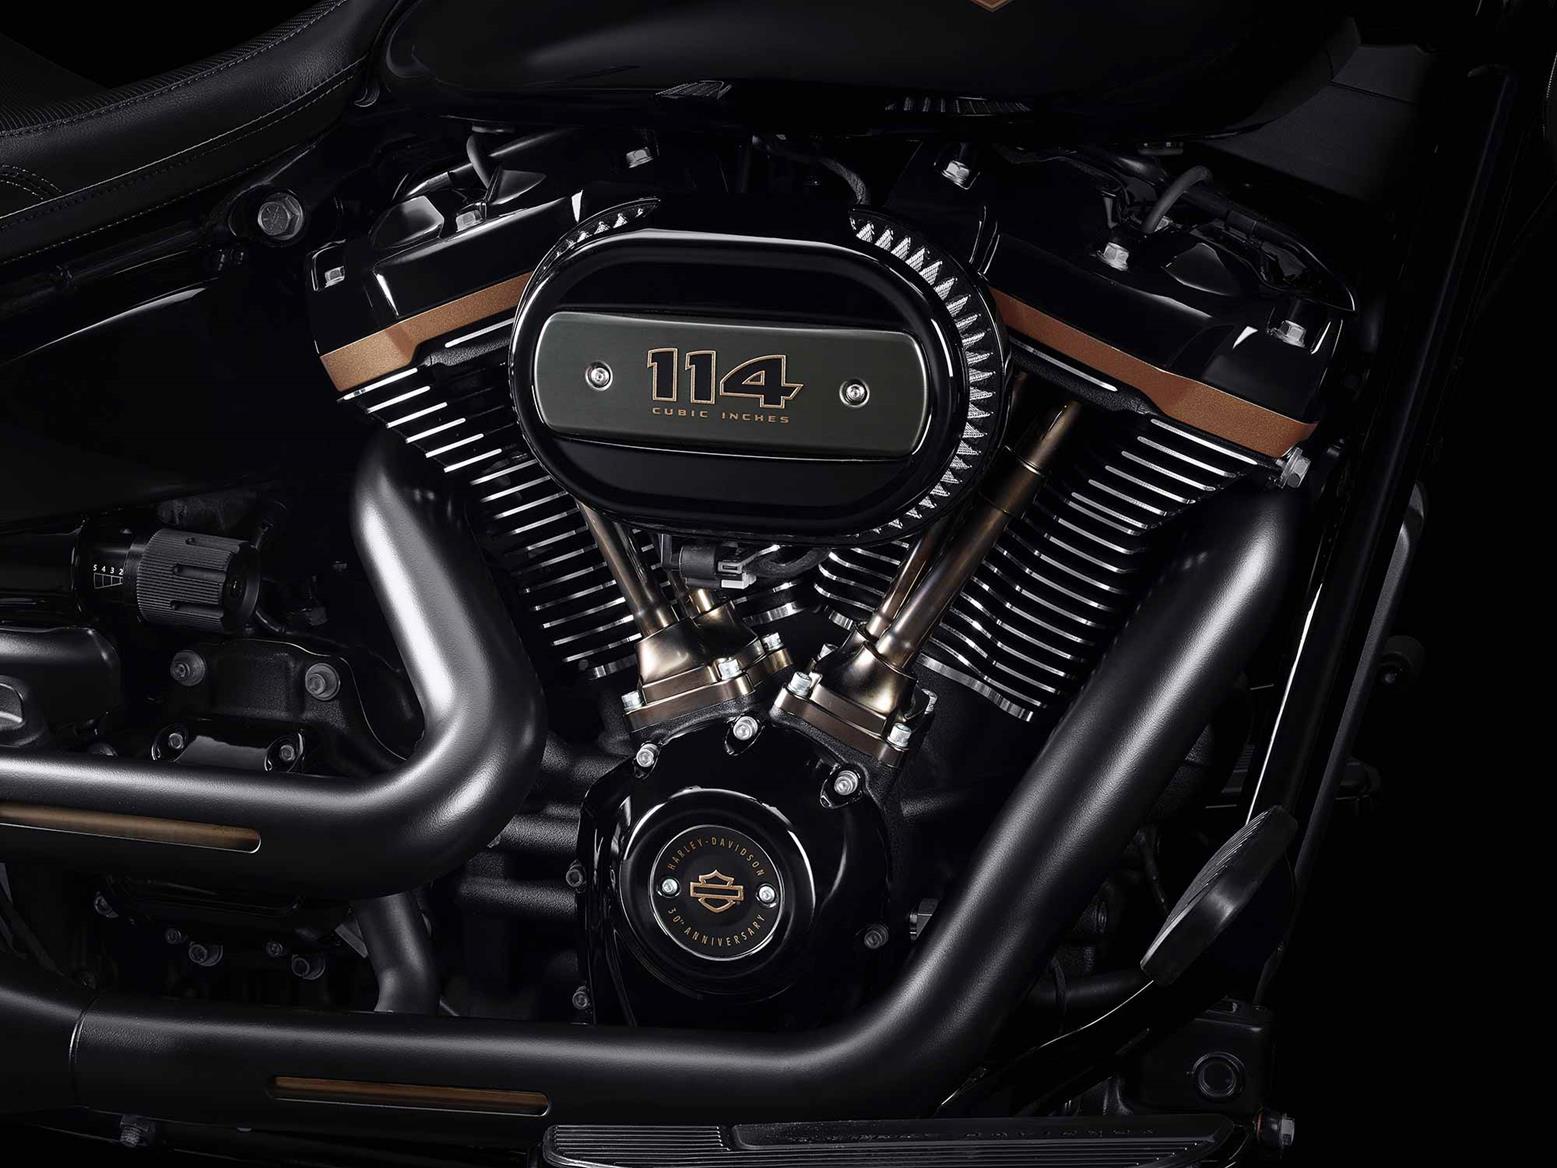 Harley Davidson Celebrate 30 Years Of The Fat Boy With Blacked Out Special Edition Mcn